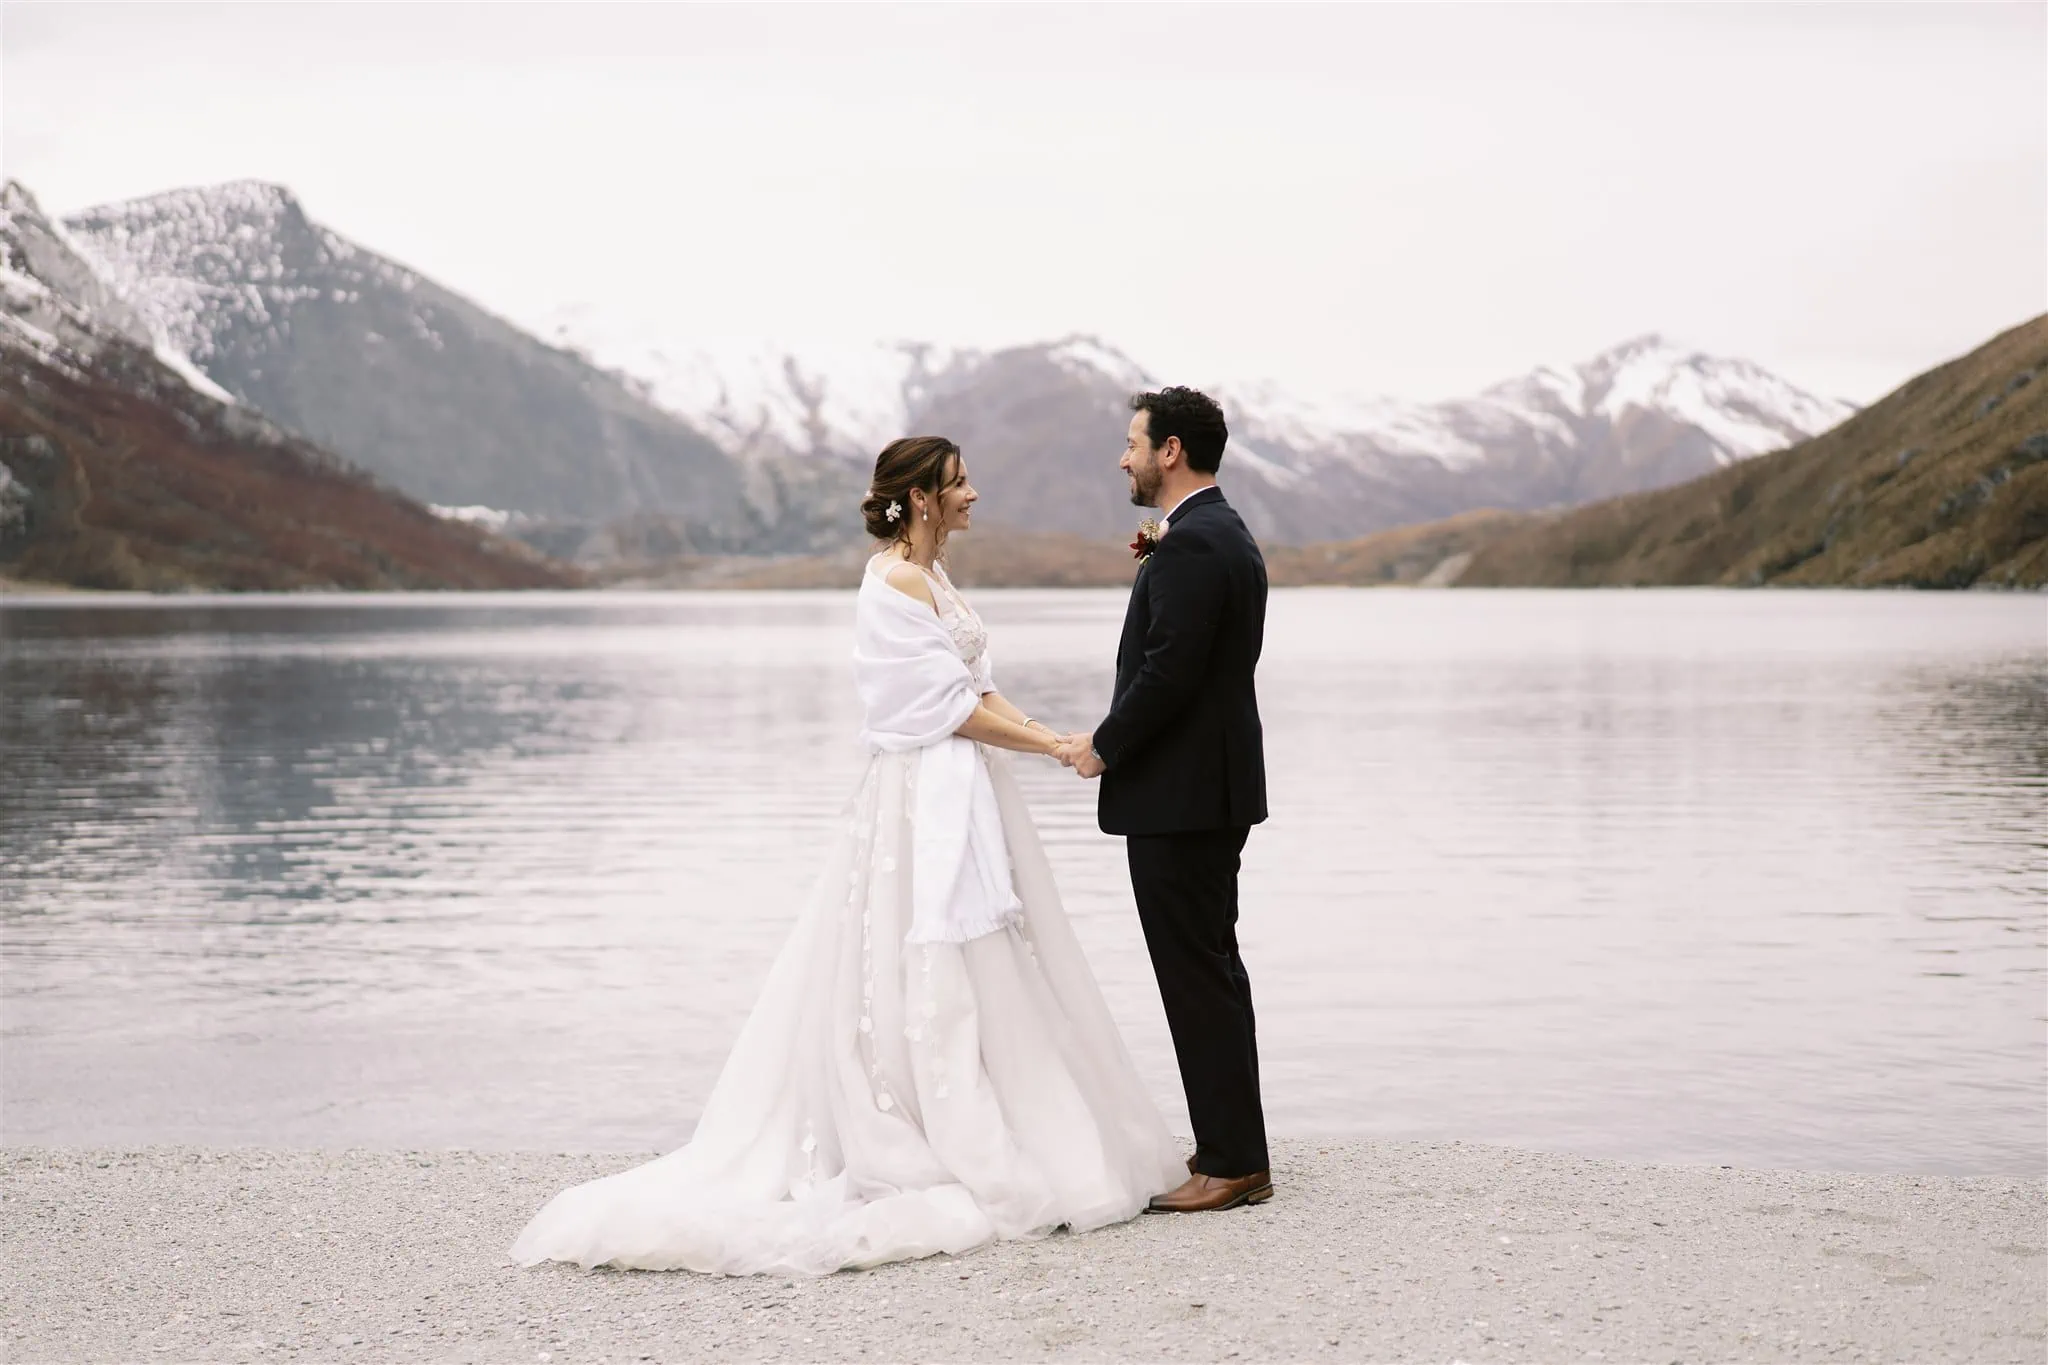 Queenstown New Zealand Elopement Wedding Photographer - Alex and Shahar, the bride and groom, standing next to a breathtaking lake with majestic mountains in the background.